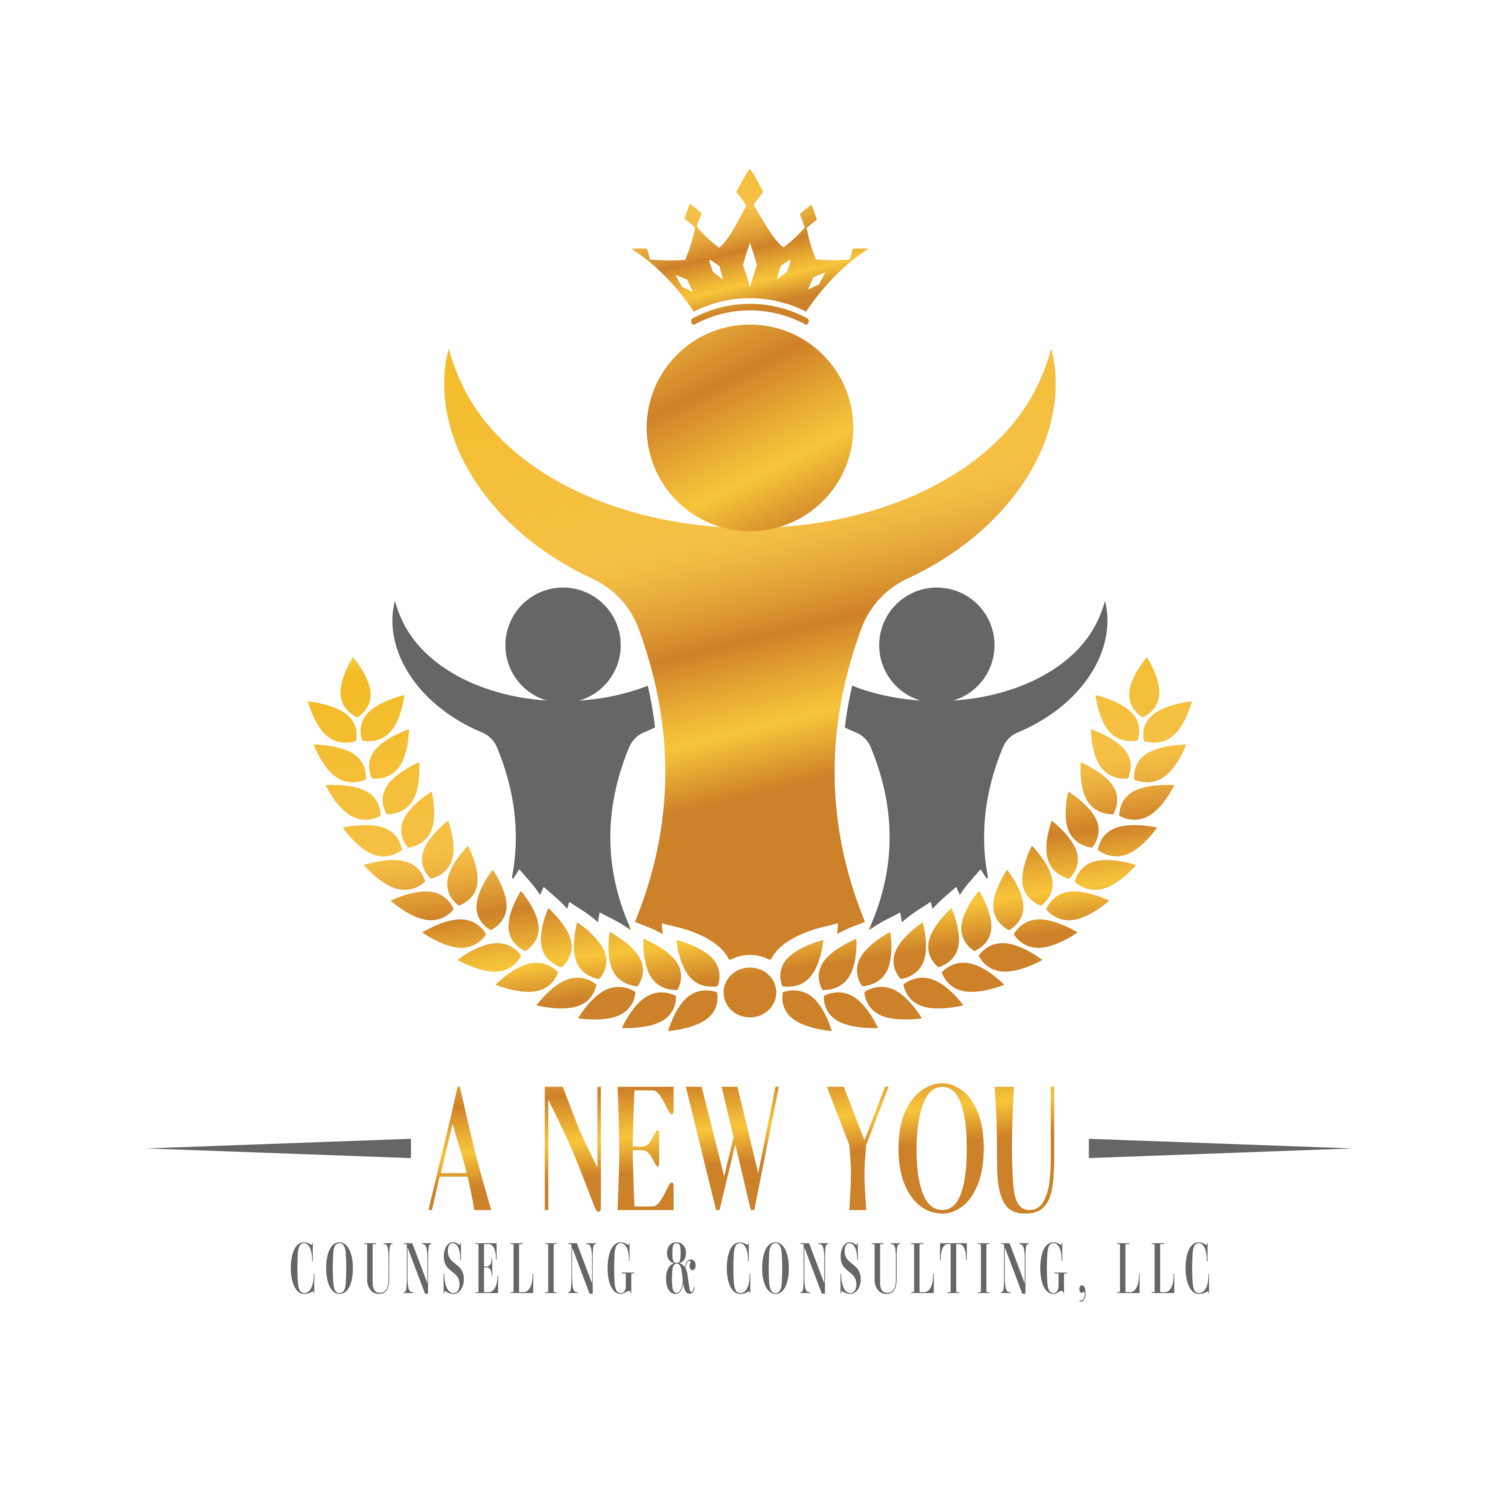 A New You Counseling and Consulting, LLC